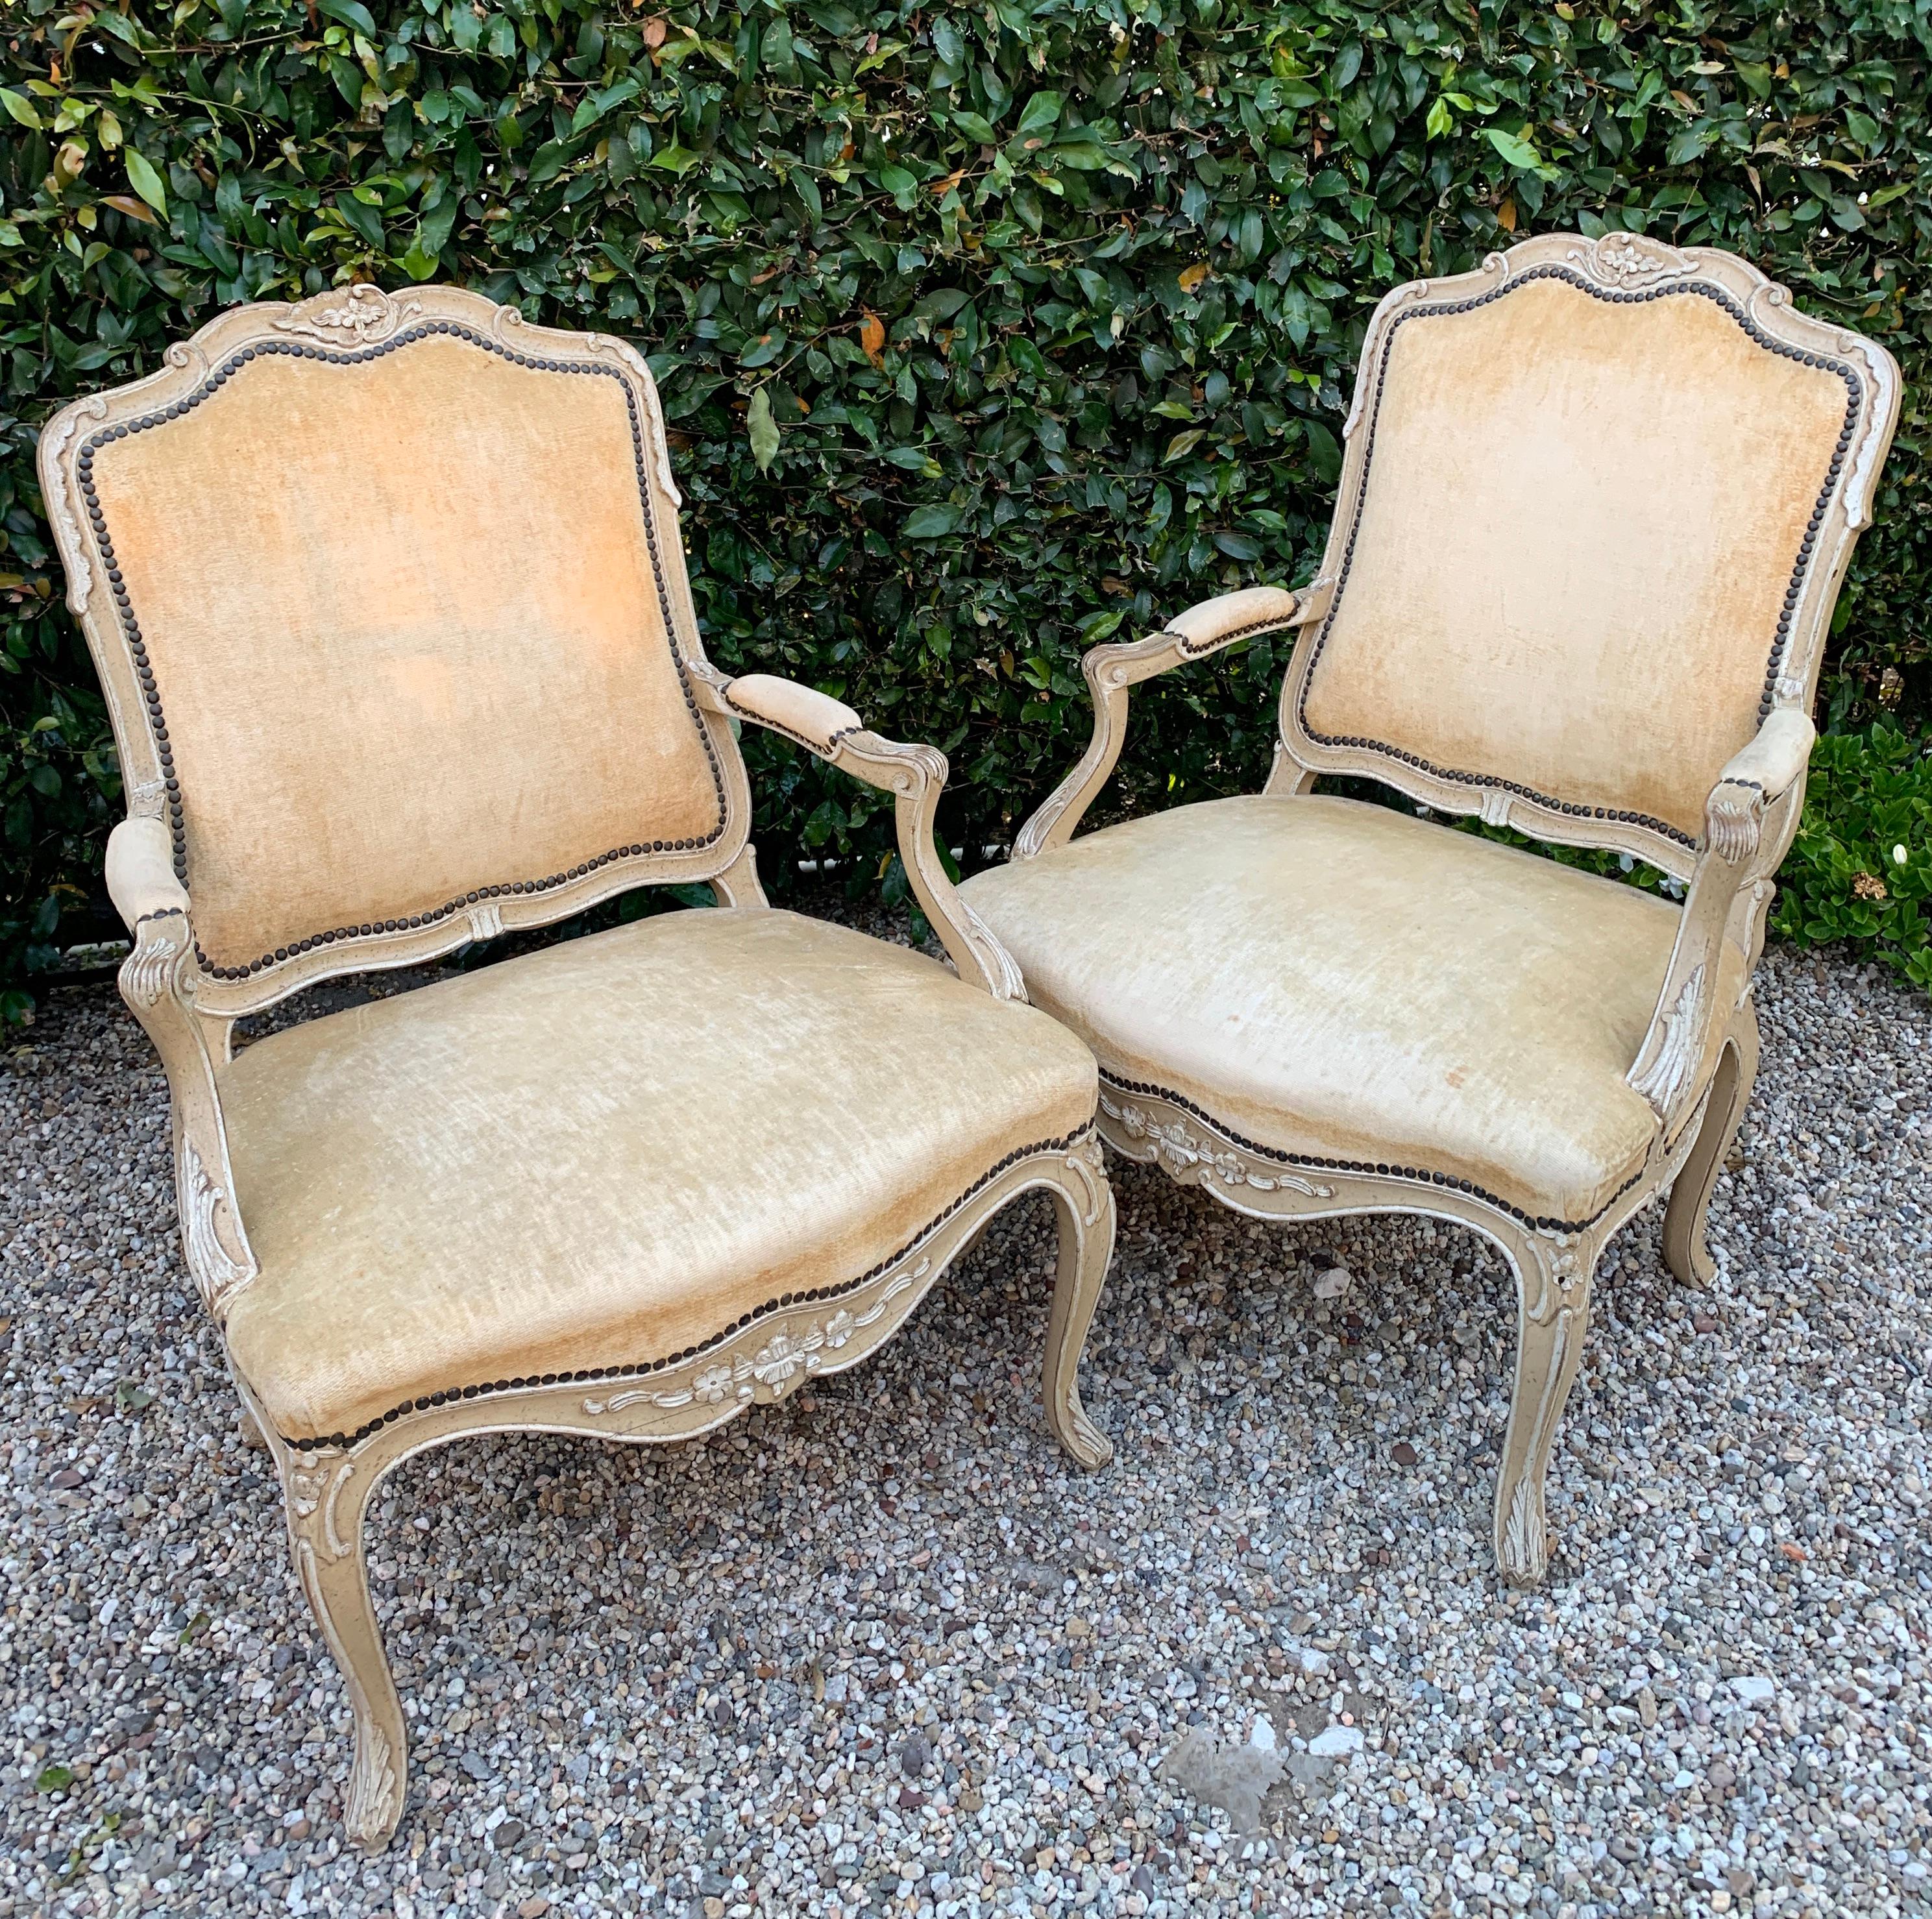 Pair of bergere Fauteuil chairs in the style of Louis XV - A lovely pair with great age and dimension - cream velvet with bone finish.